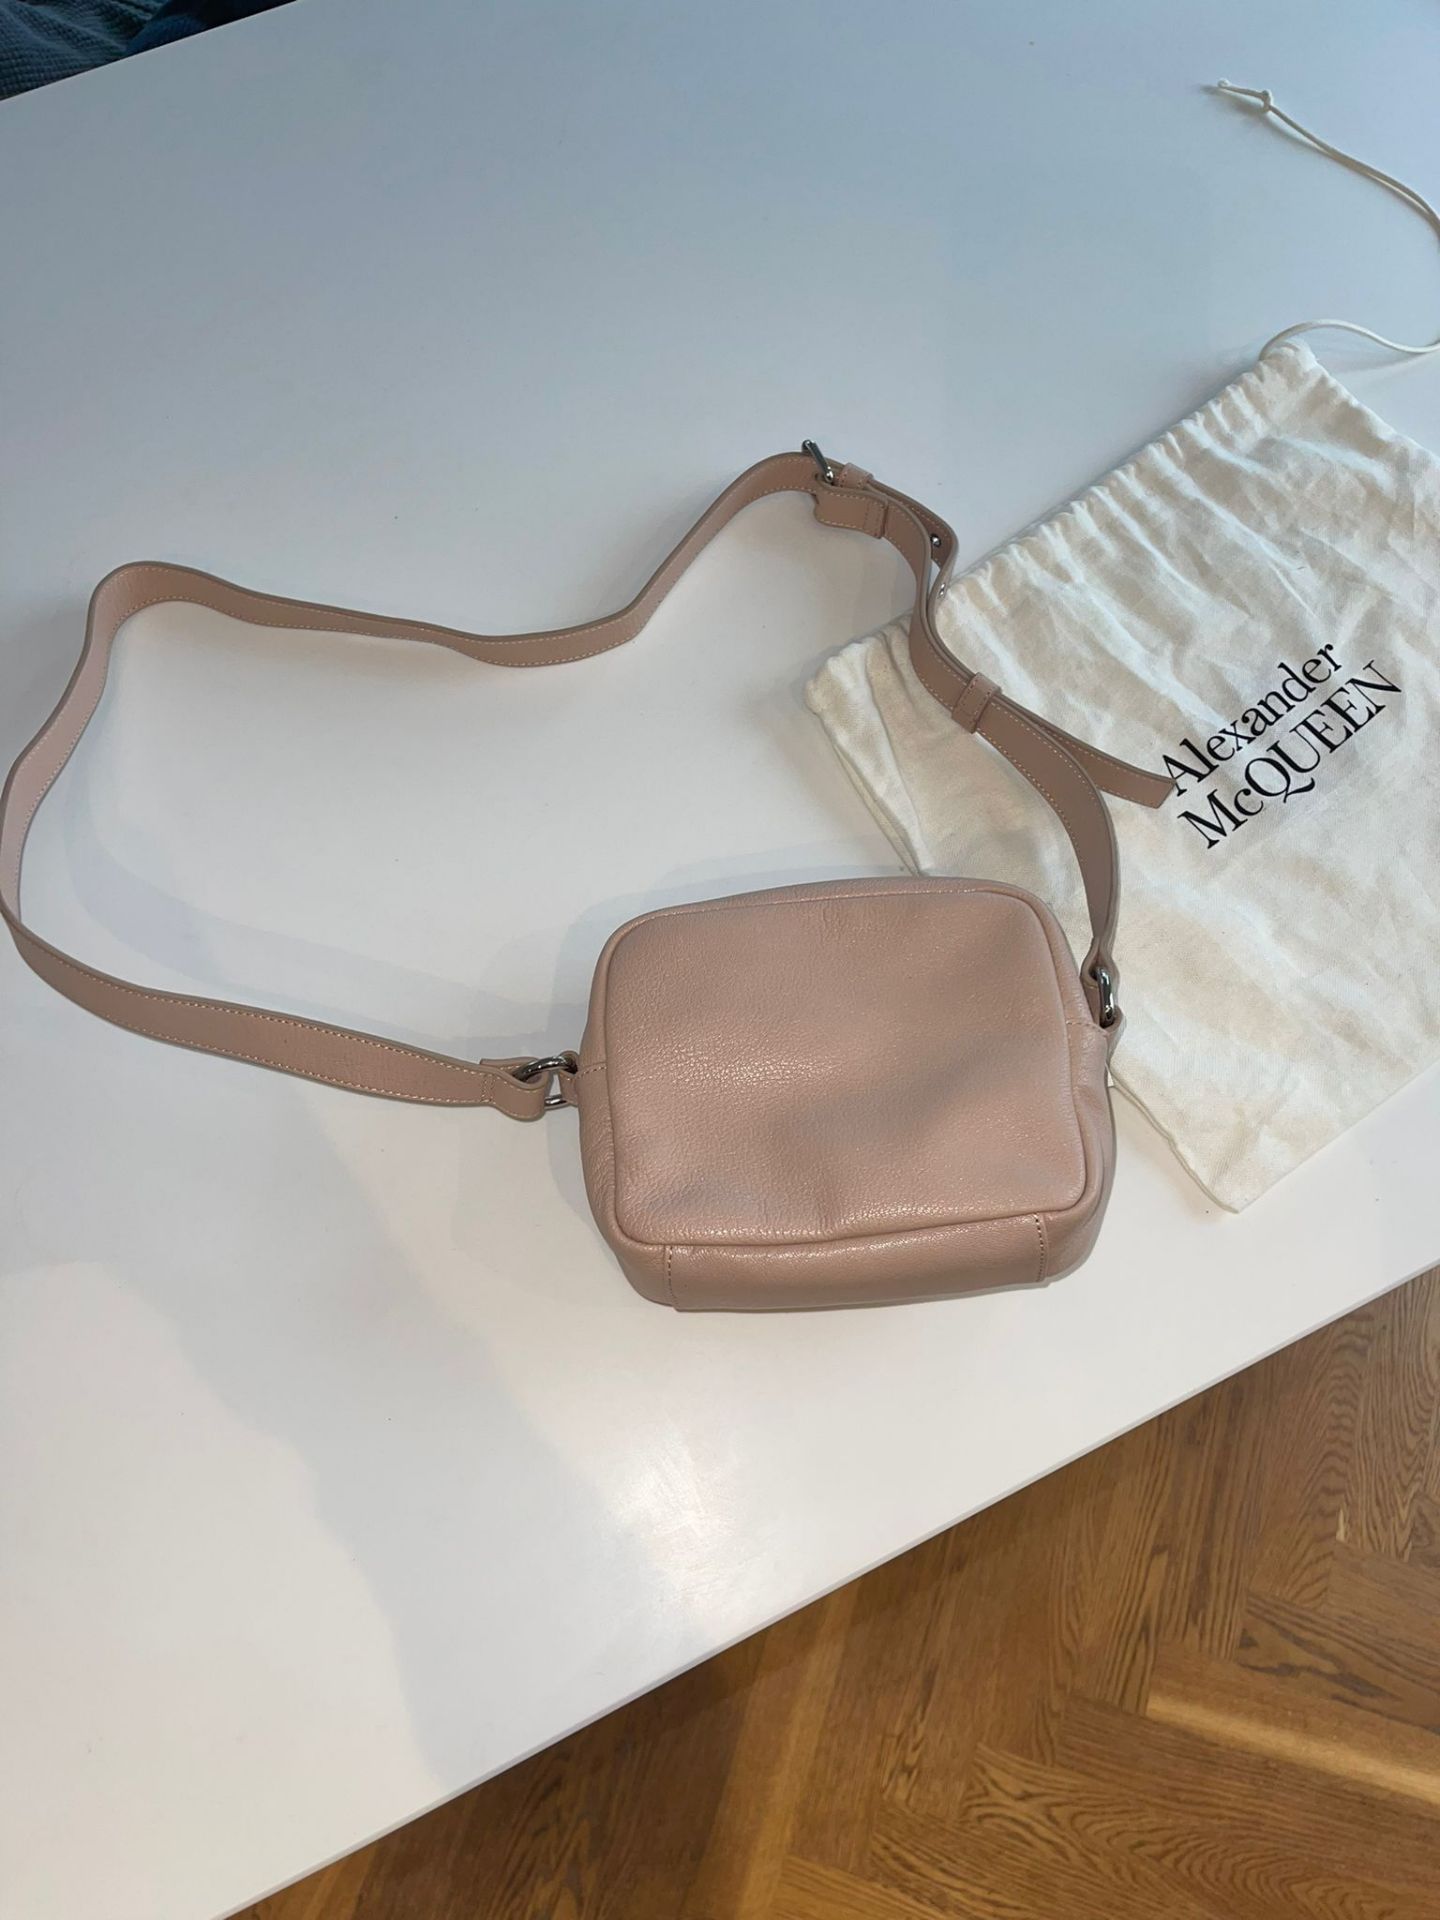 Alexander Mcqueen Small Crossbody Satchel Bag in Nude. Small defect on the Zipper. RRP £450 - Image 4 of 4